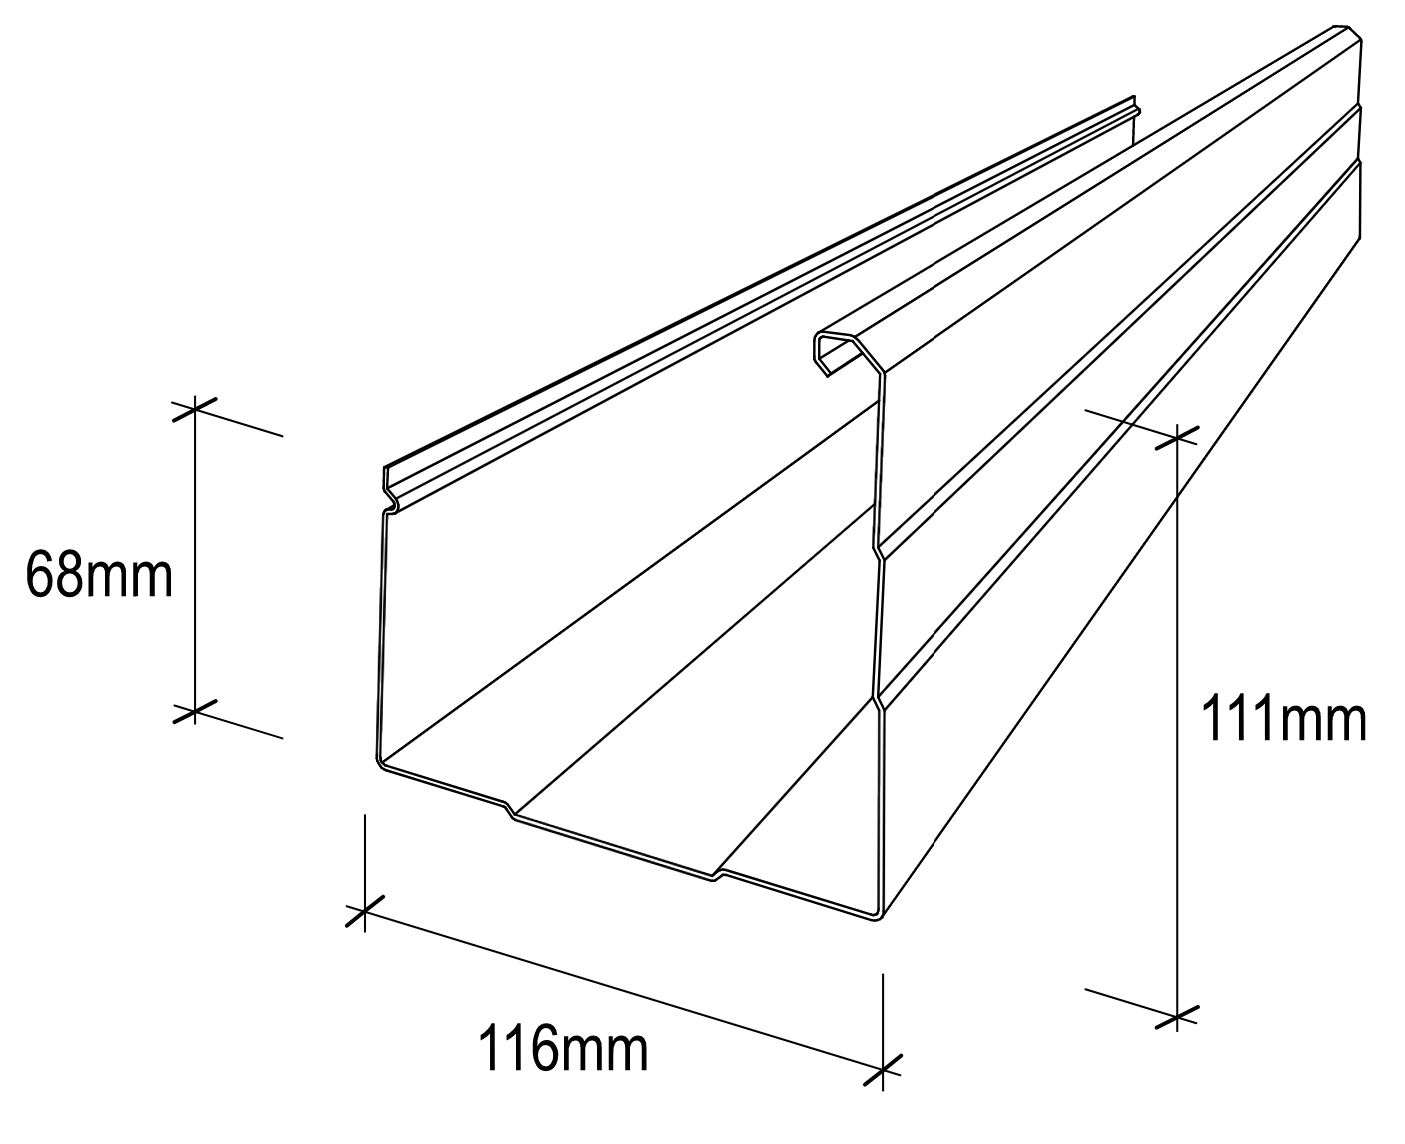 Stramit® Compact Gutter dimensions